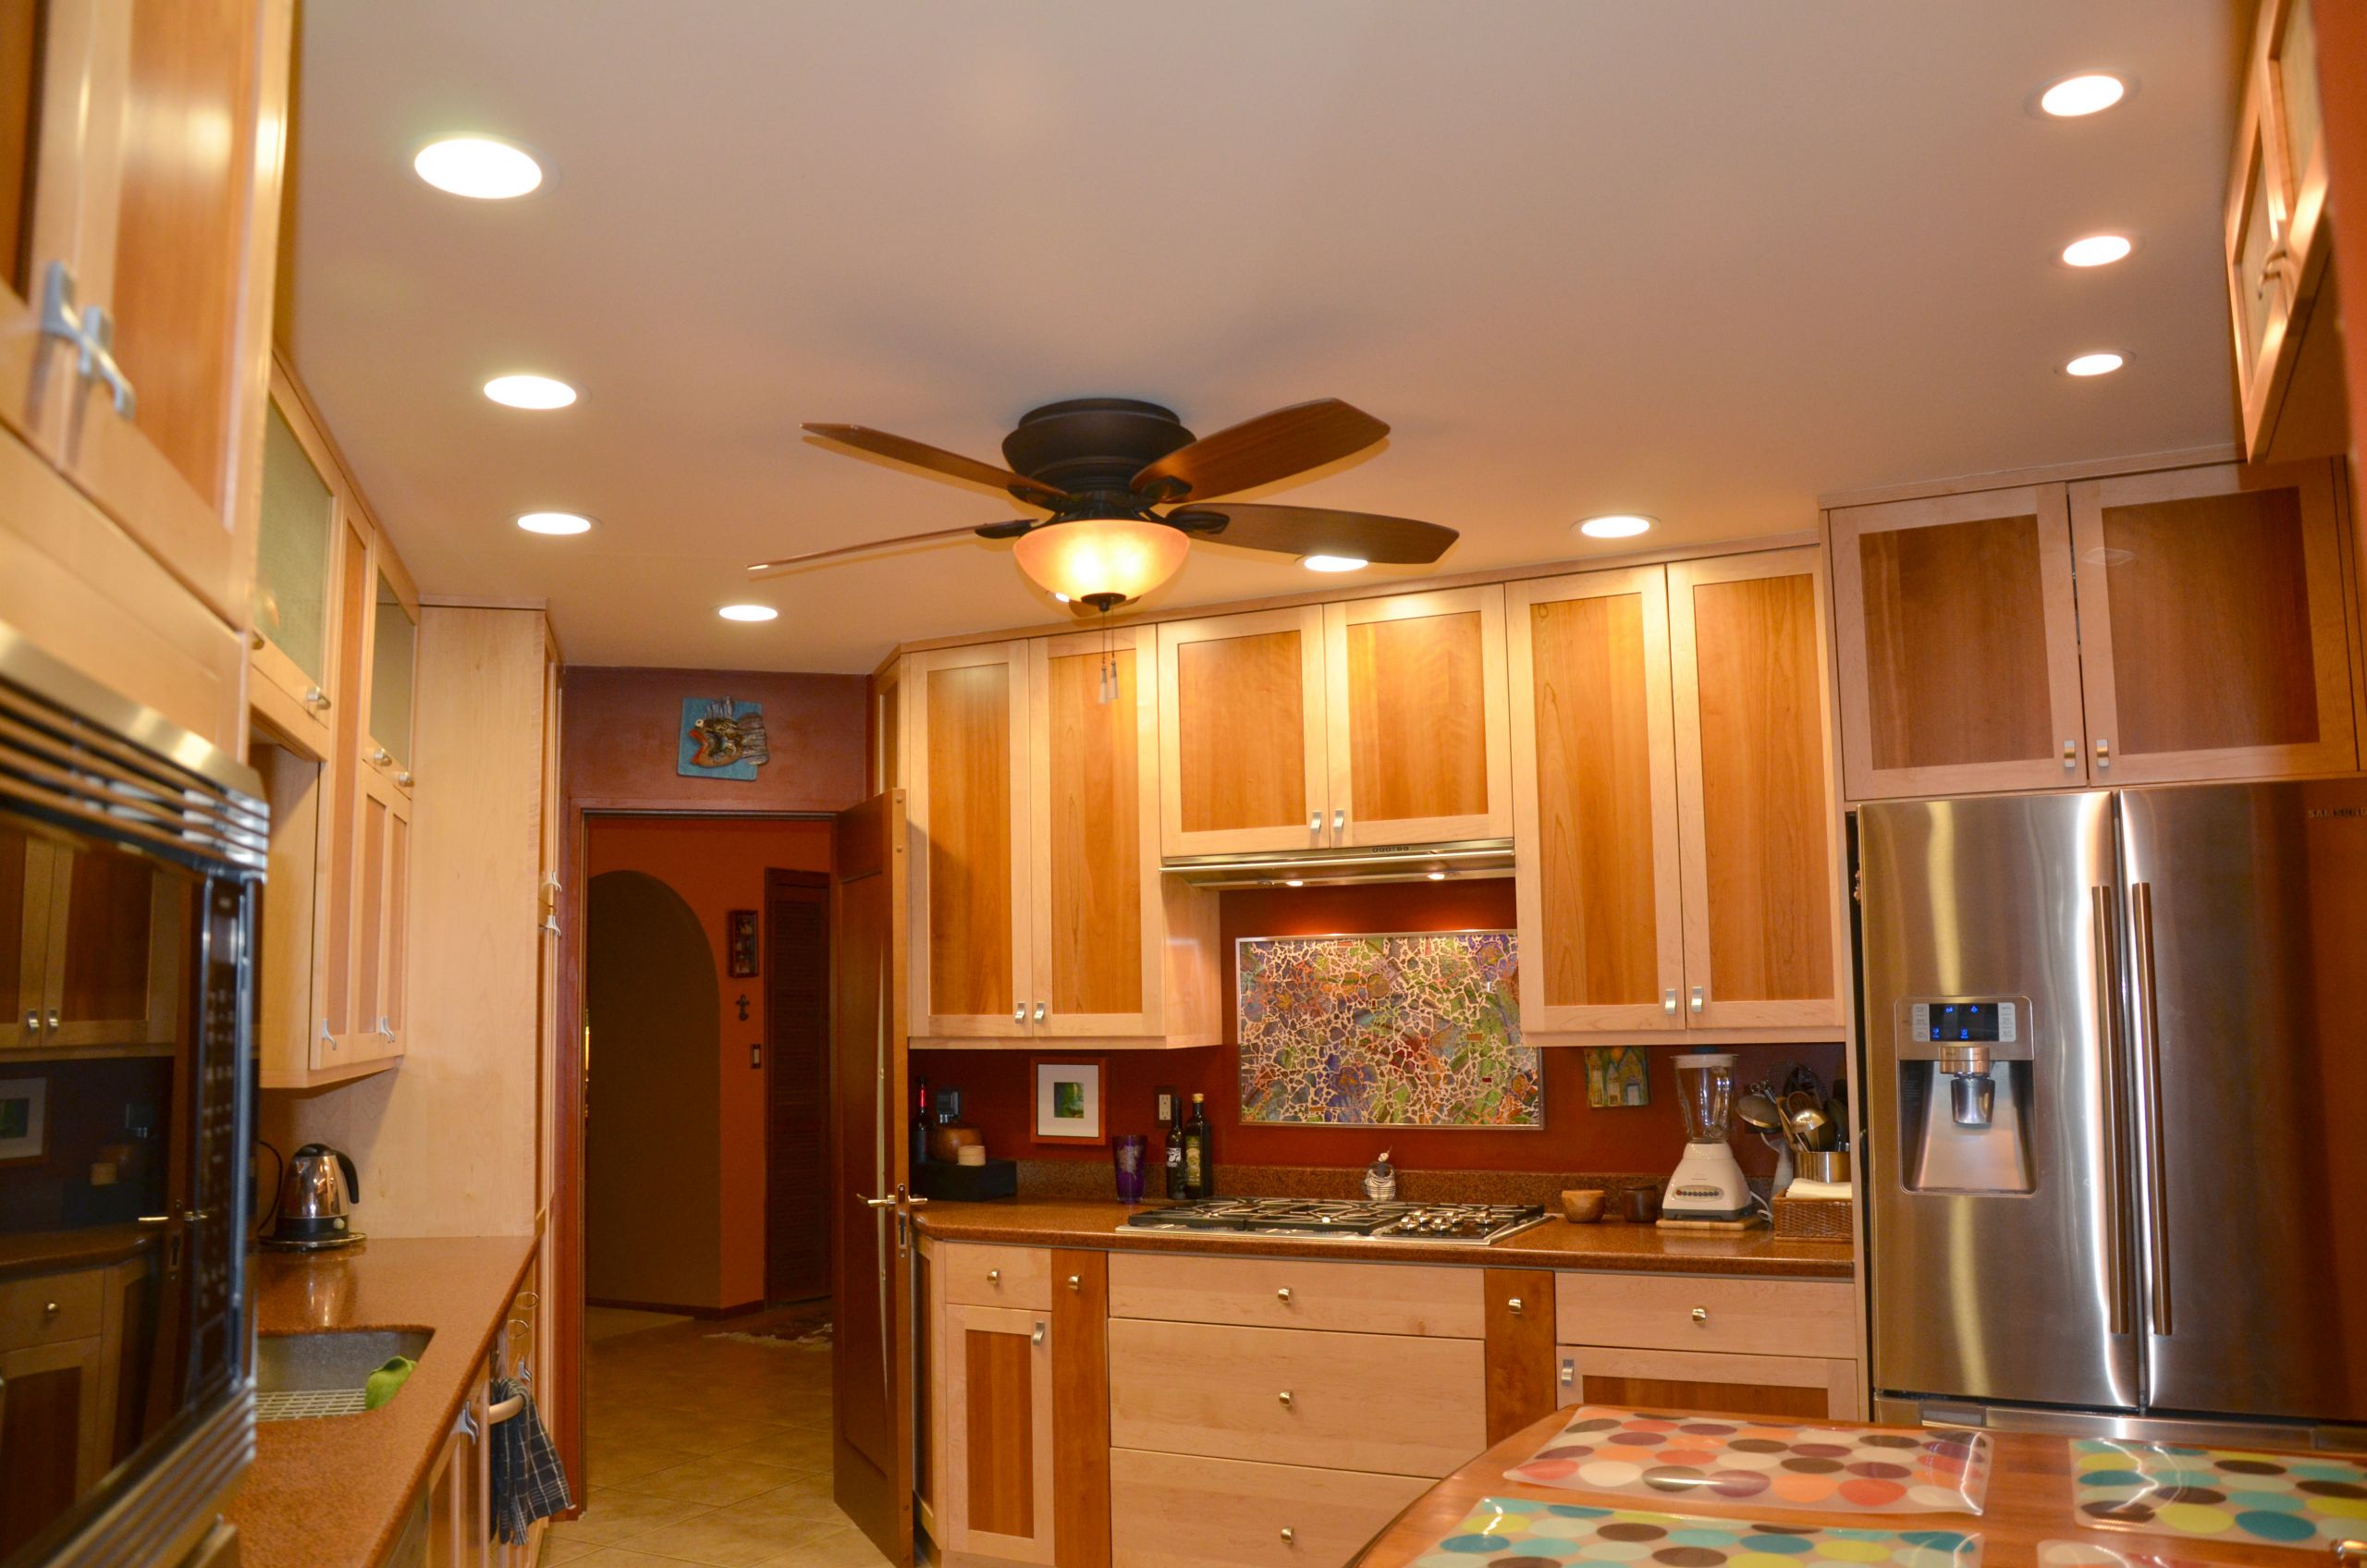 Kitchen Fan With Lights
 How to Get Your Kitchen Ceiling Lights Right